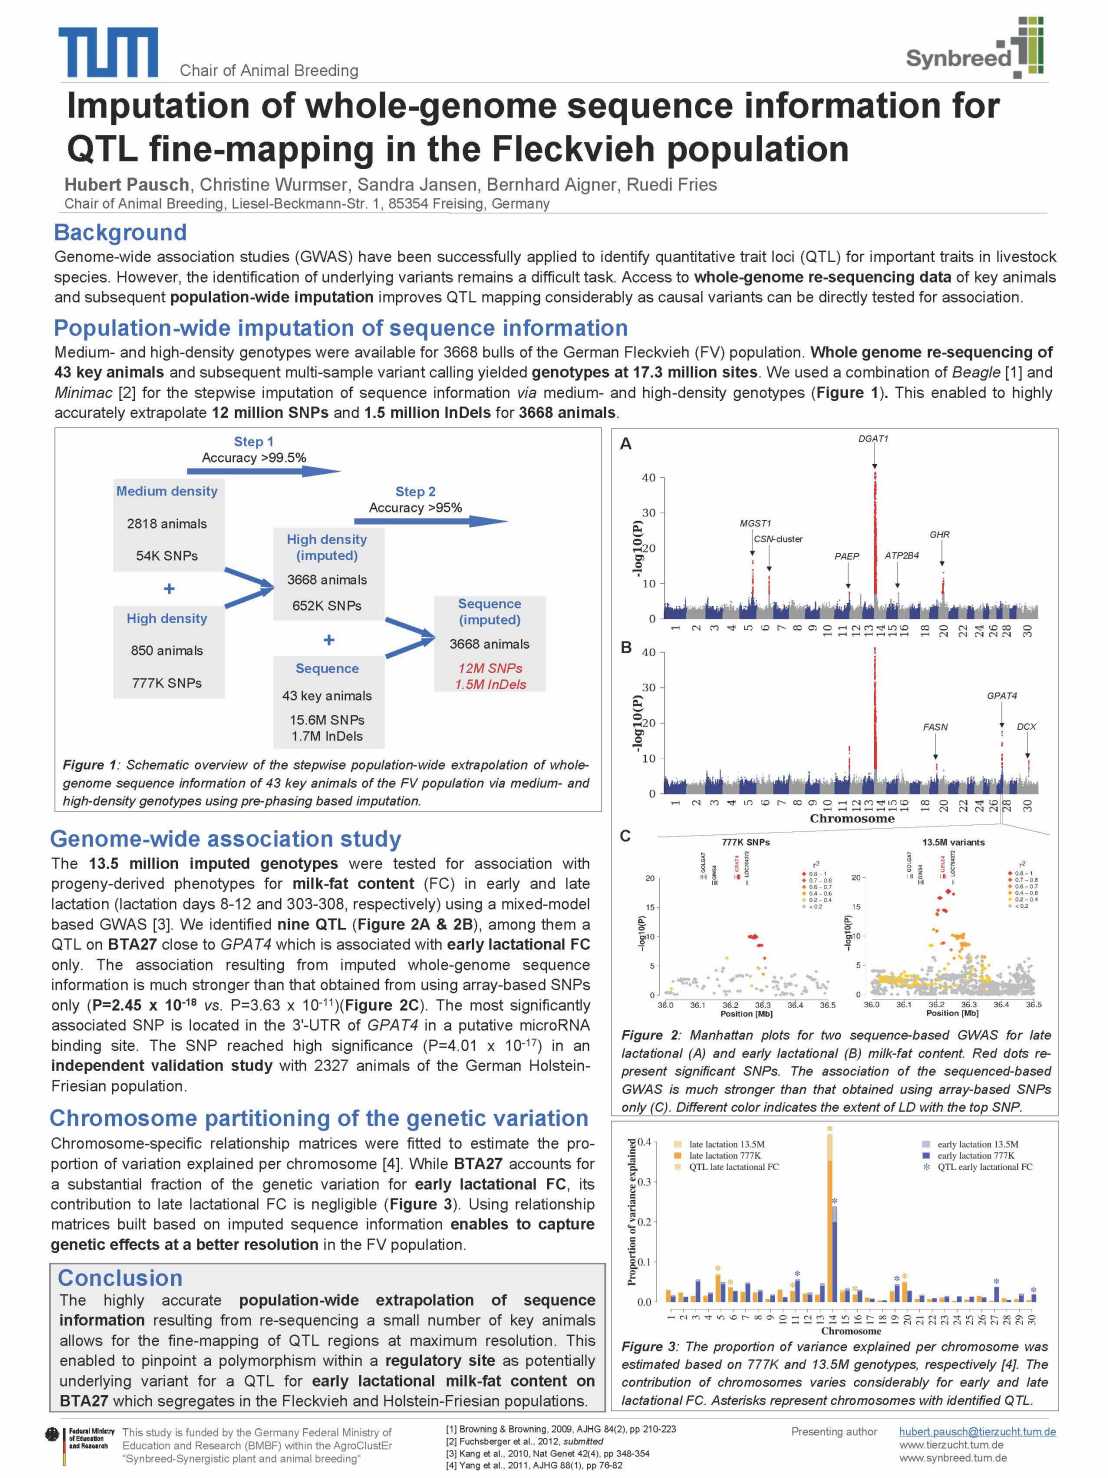 Poster about imputation of whole-genome sequence information for QTL fine-mapping in the Fleckvieh population